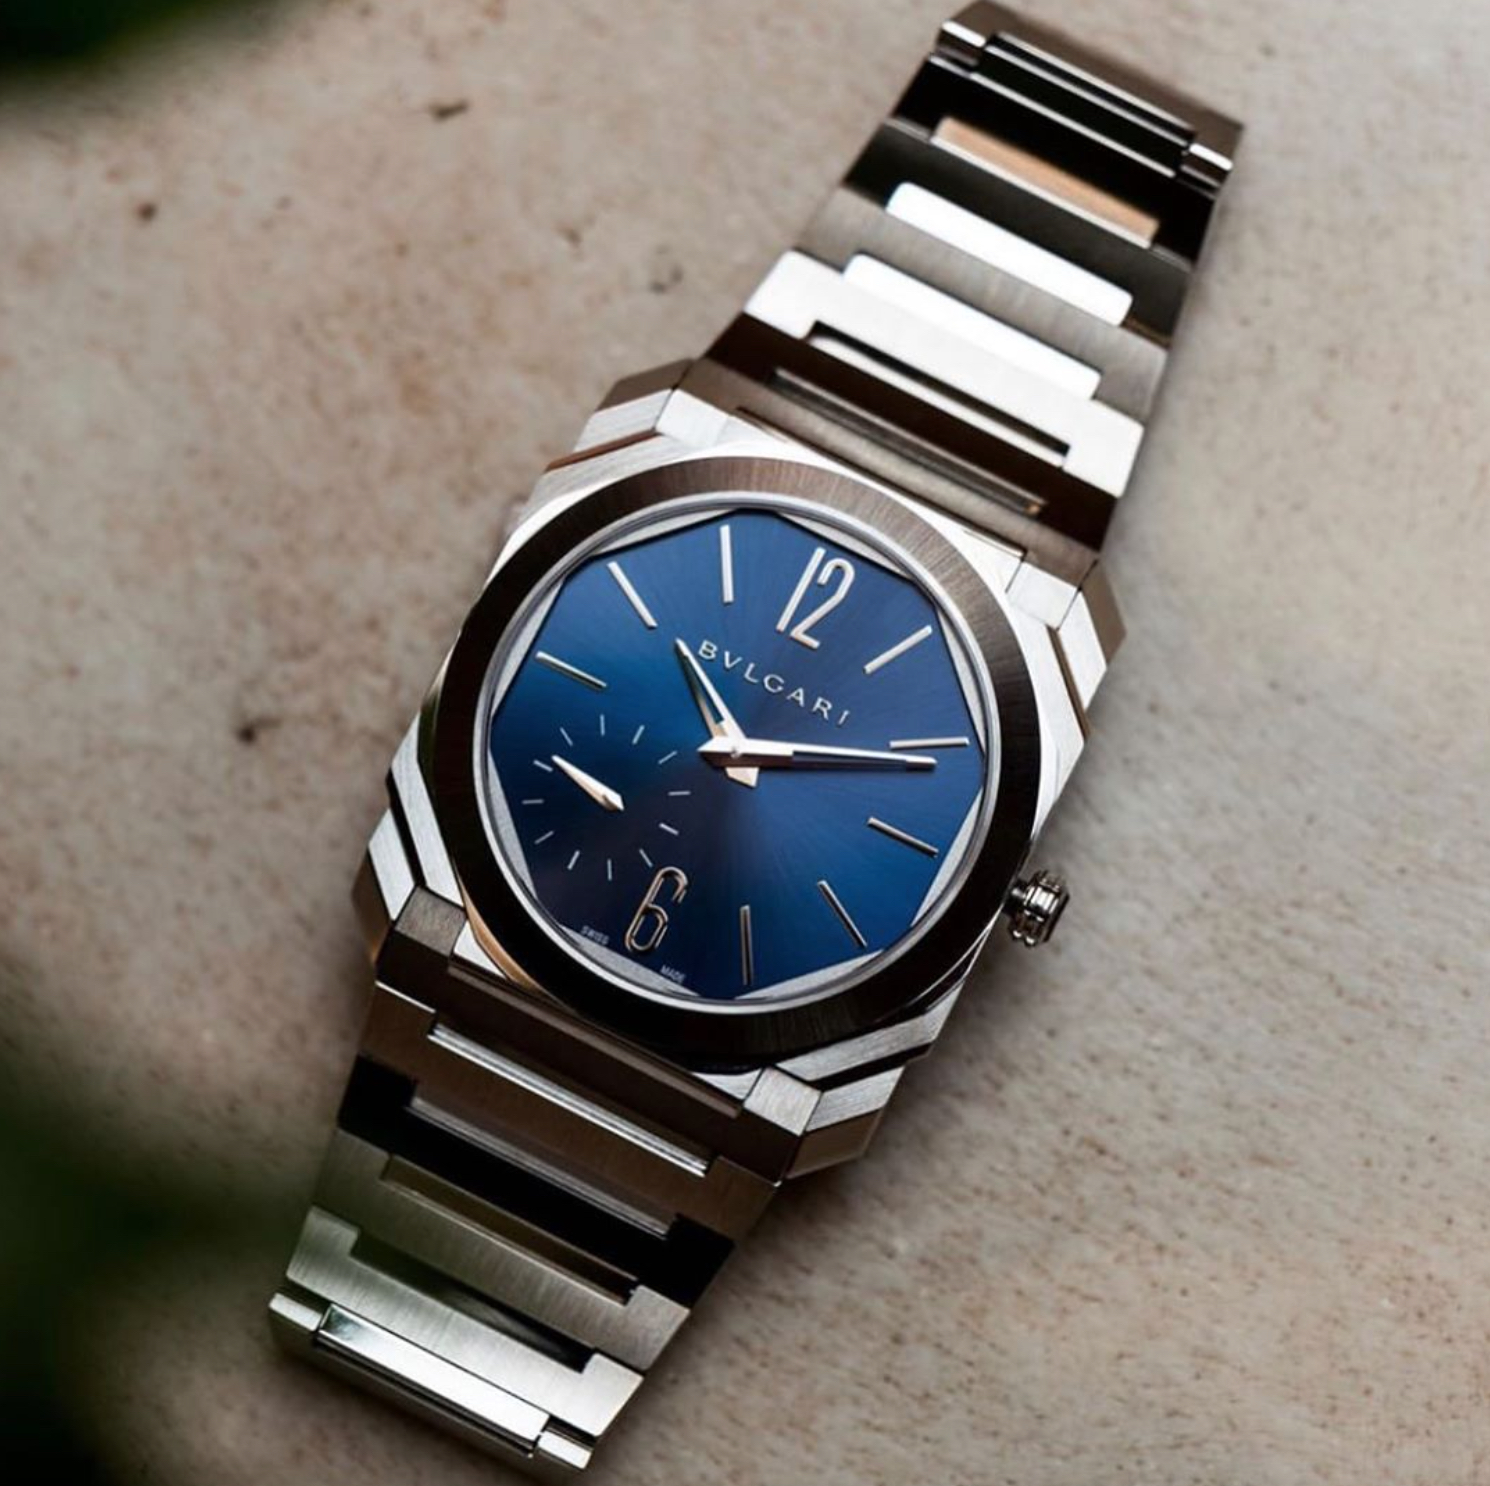 VIDEO: Finally...! The Bulgari Octo Finissimo satin-polished steel with blue  dial captured in glorious high definition here - Time and Tide Watches